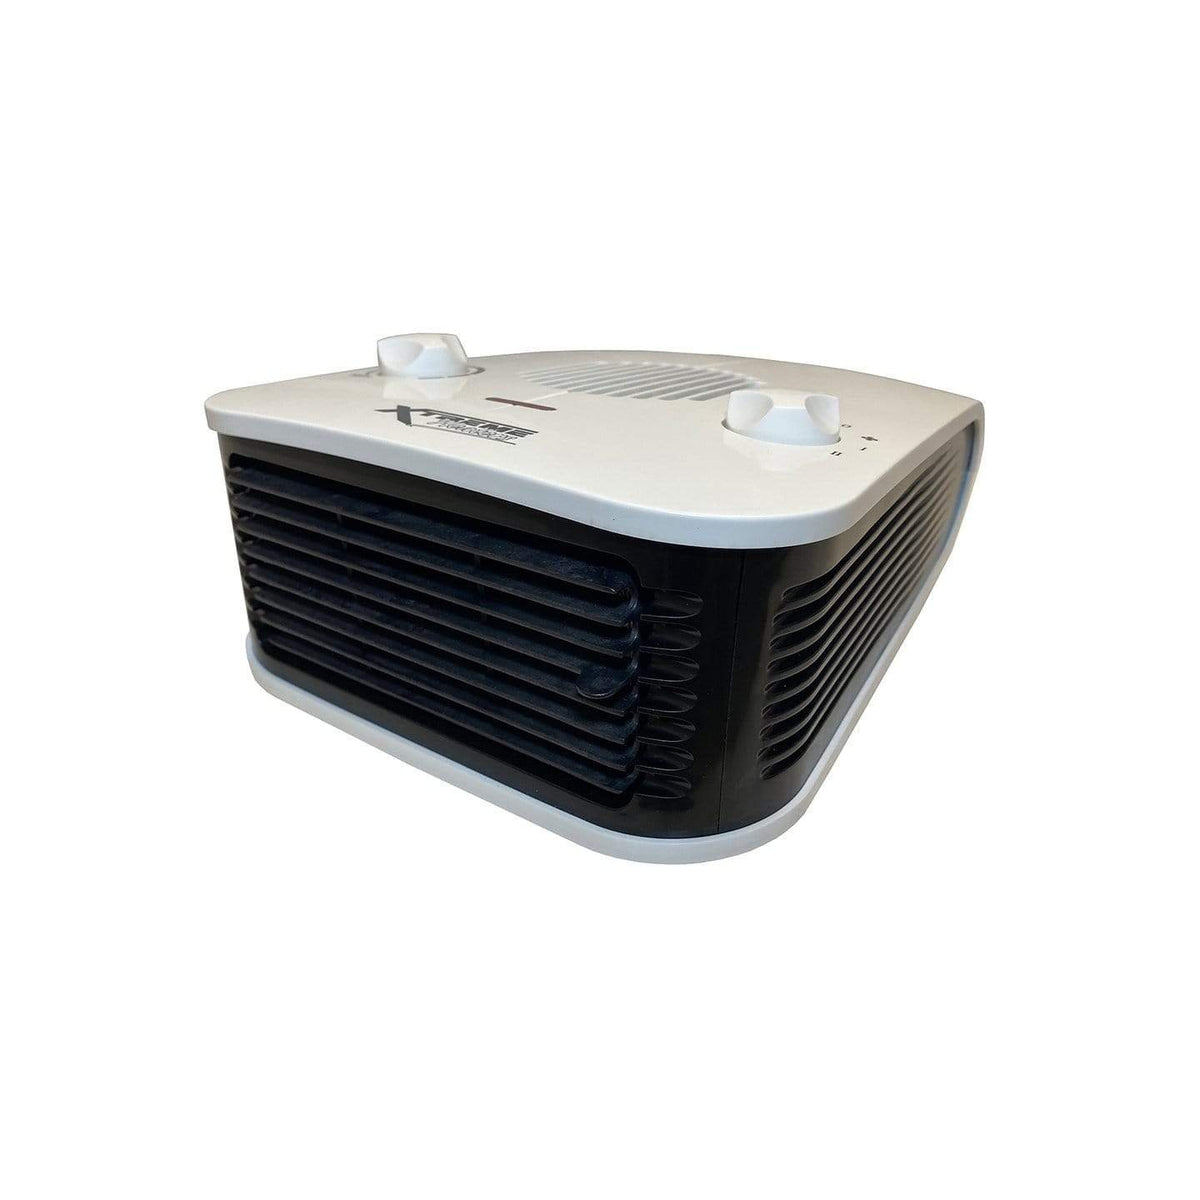 XTREME Heaters Qualifies for Free Shipping XTreme Cabin Heater #XTRCAB